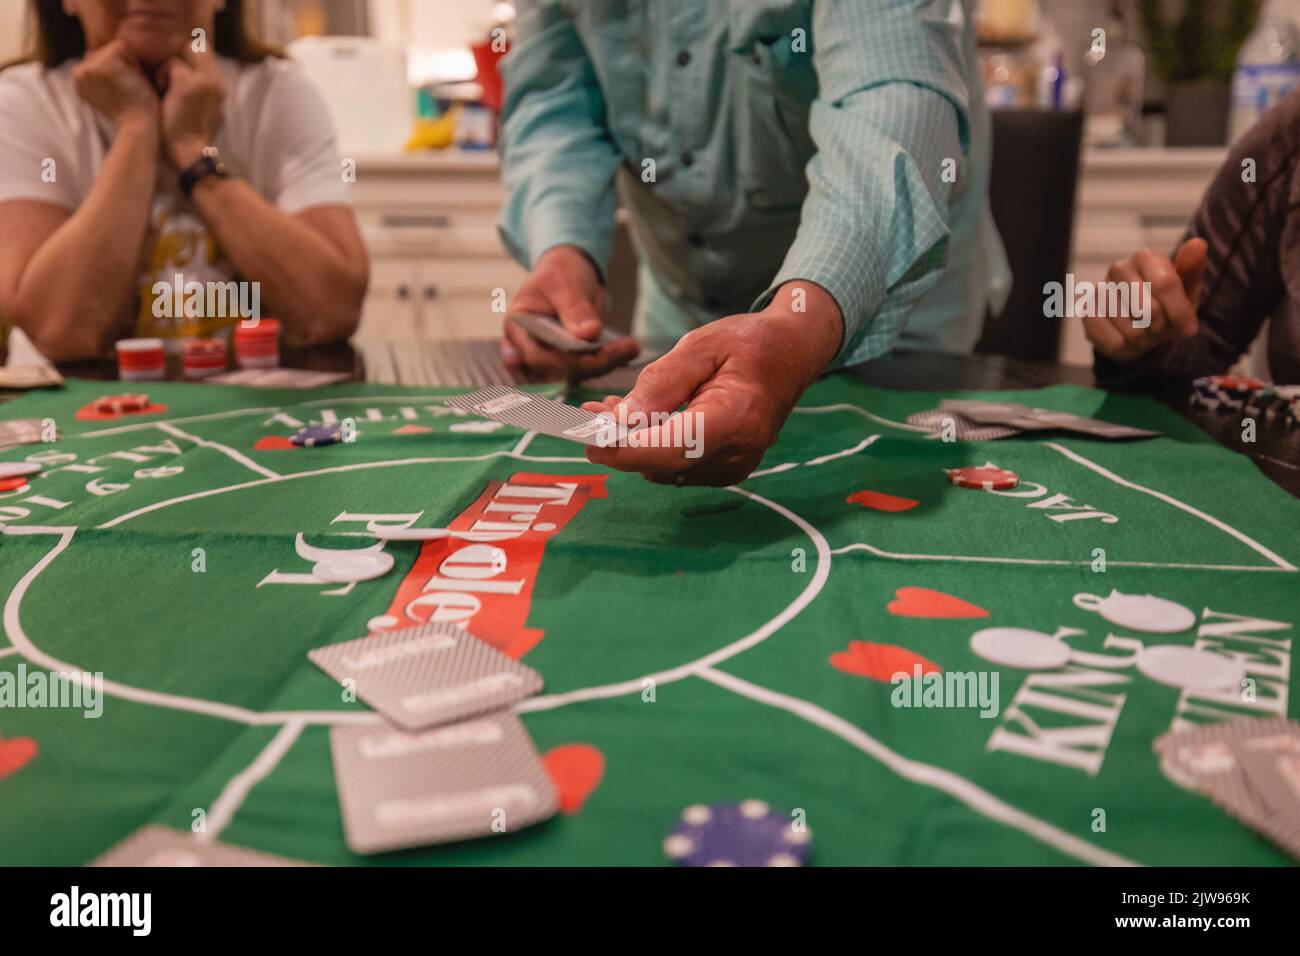 Card being dealt during a poker game Stock Photo